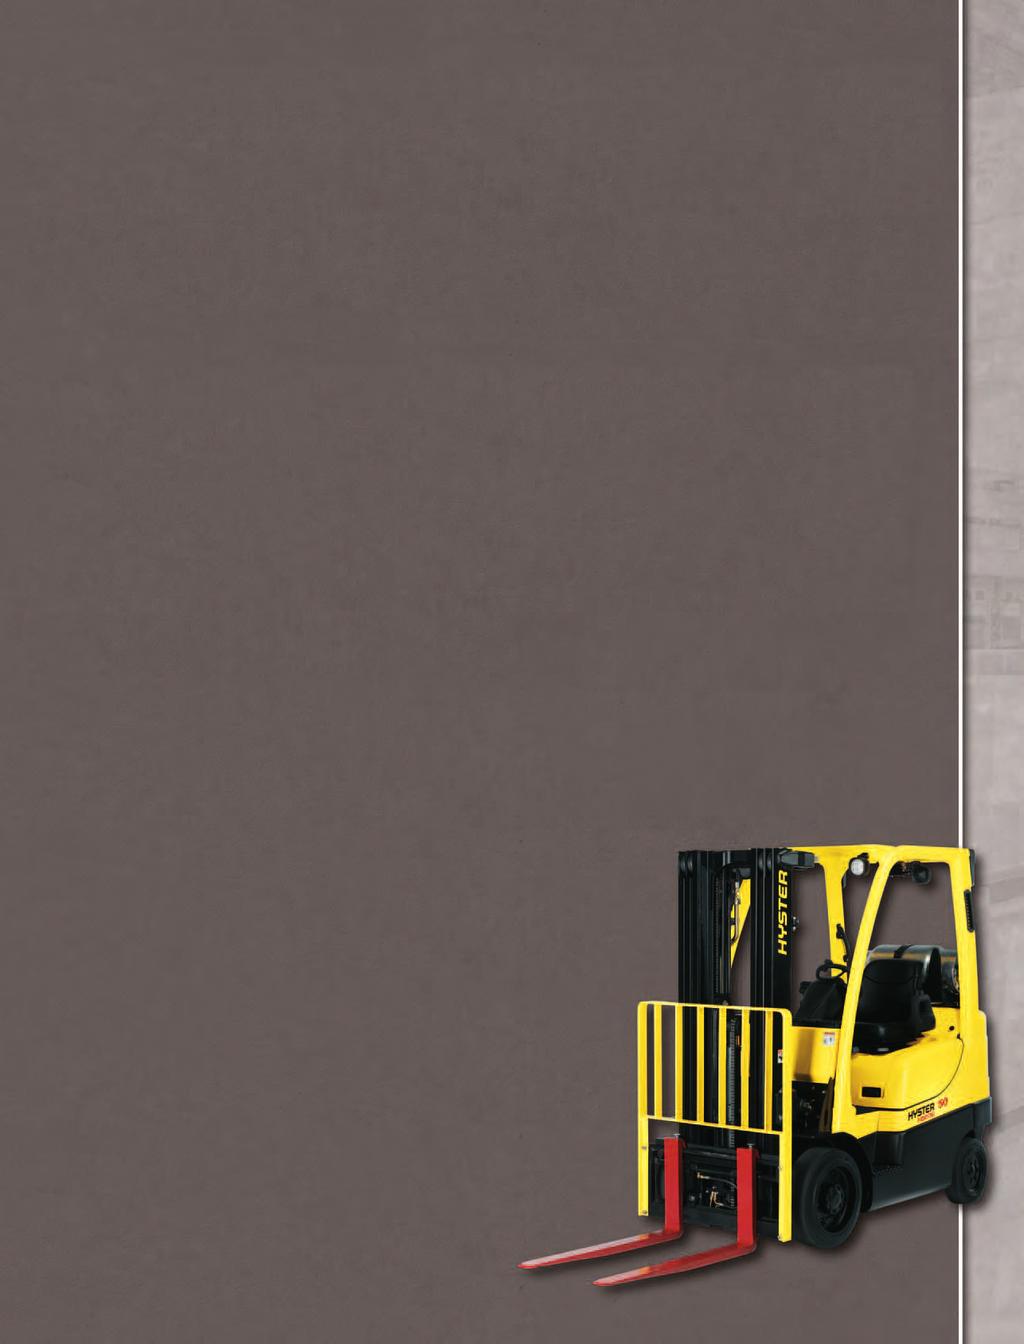 THE HYSTER DIFFERENCE IT S NOT JUST ABOUT THE LIFT TRUCKS Any company worth its weight knows success has just as much to do with the support before and after the sale, as the sale itself.